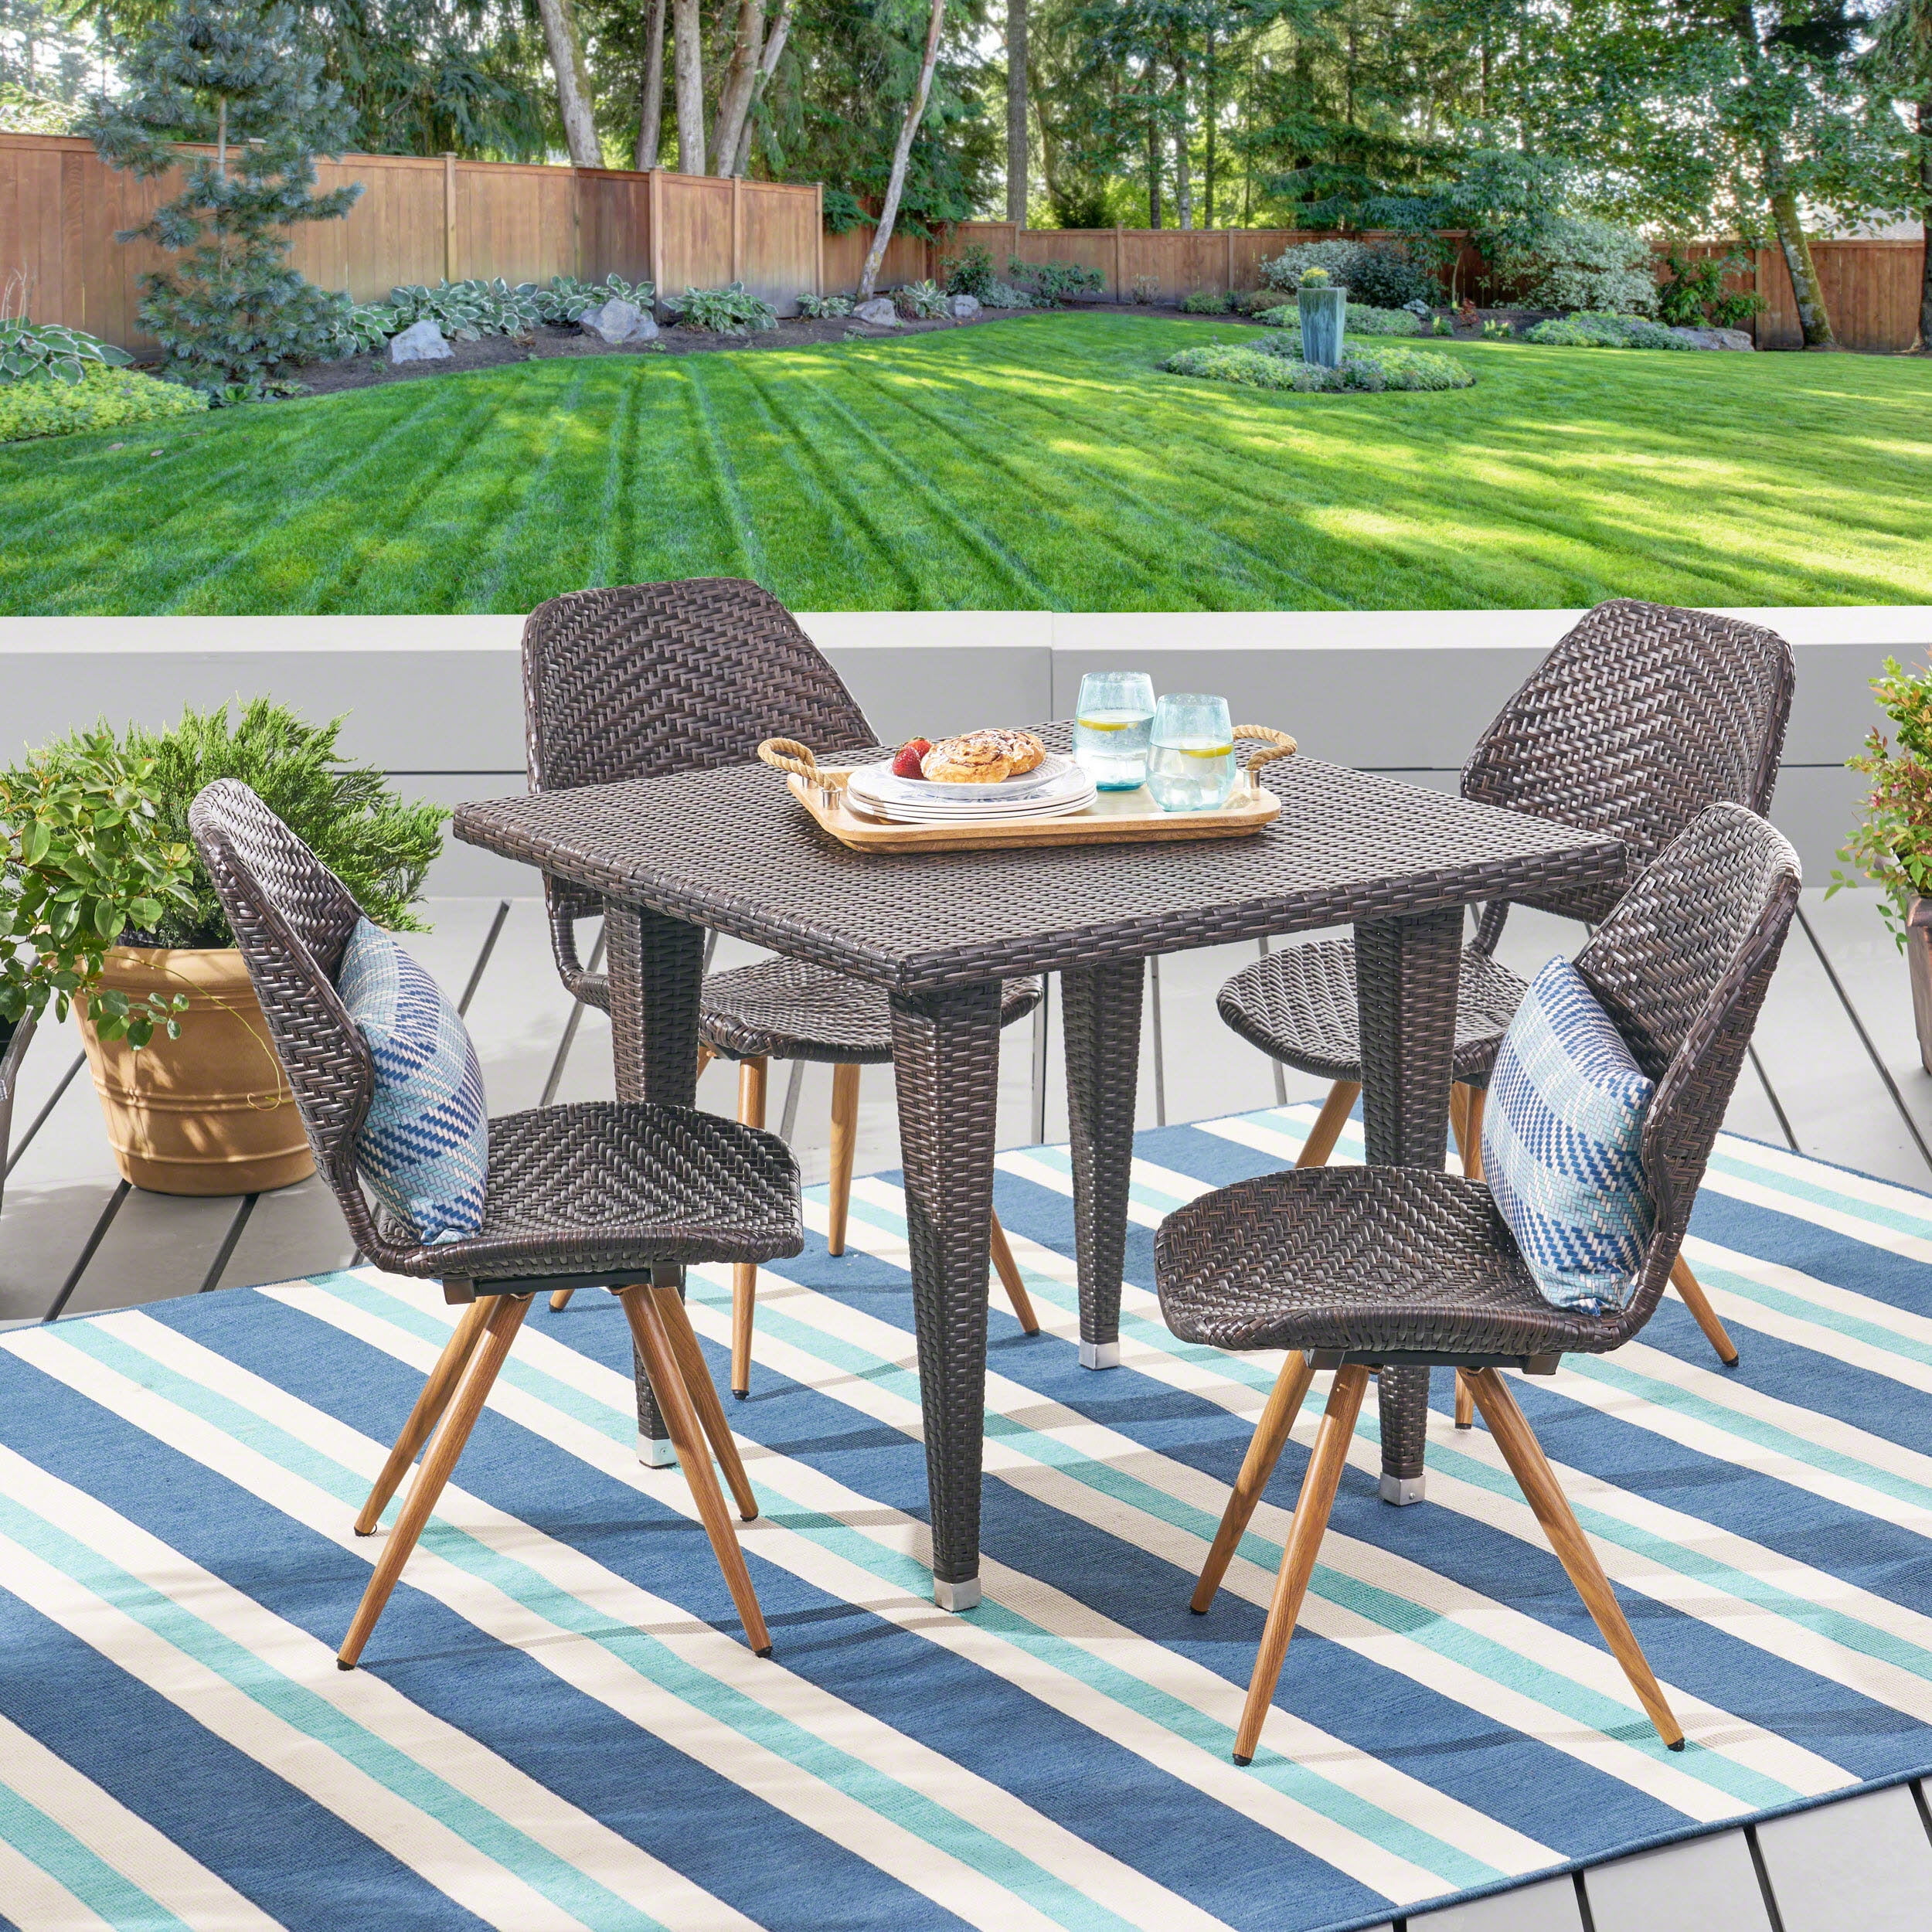 Alessia Outdoor 5 Piece Wicker Dining Set, Multibrown, Light Brown ...